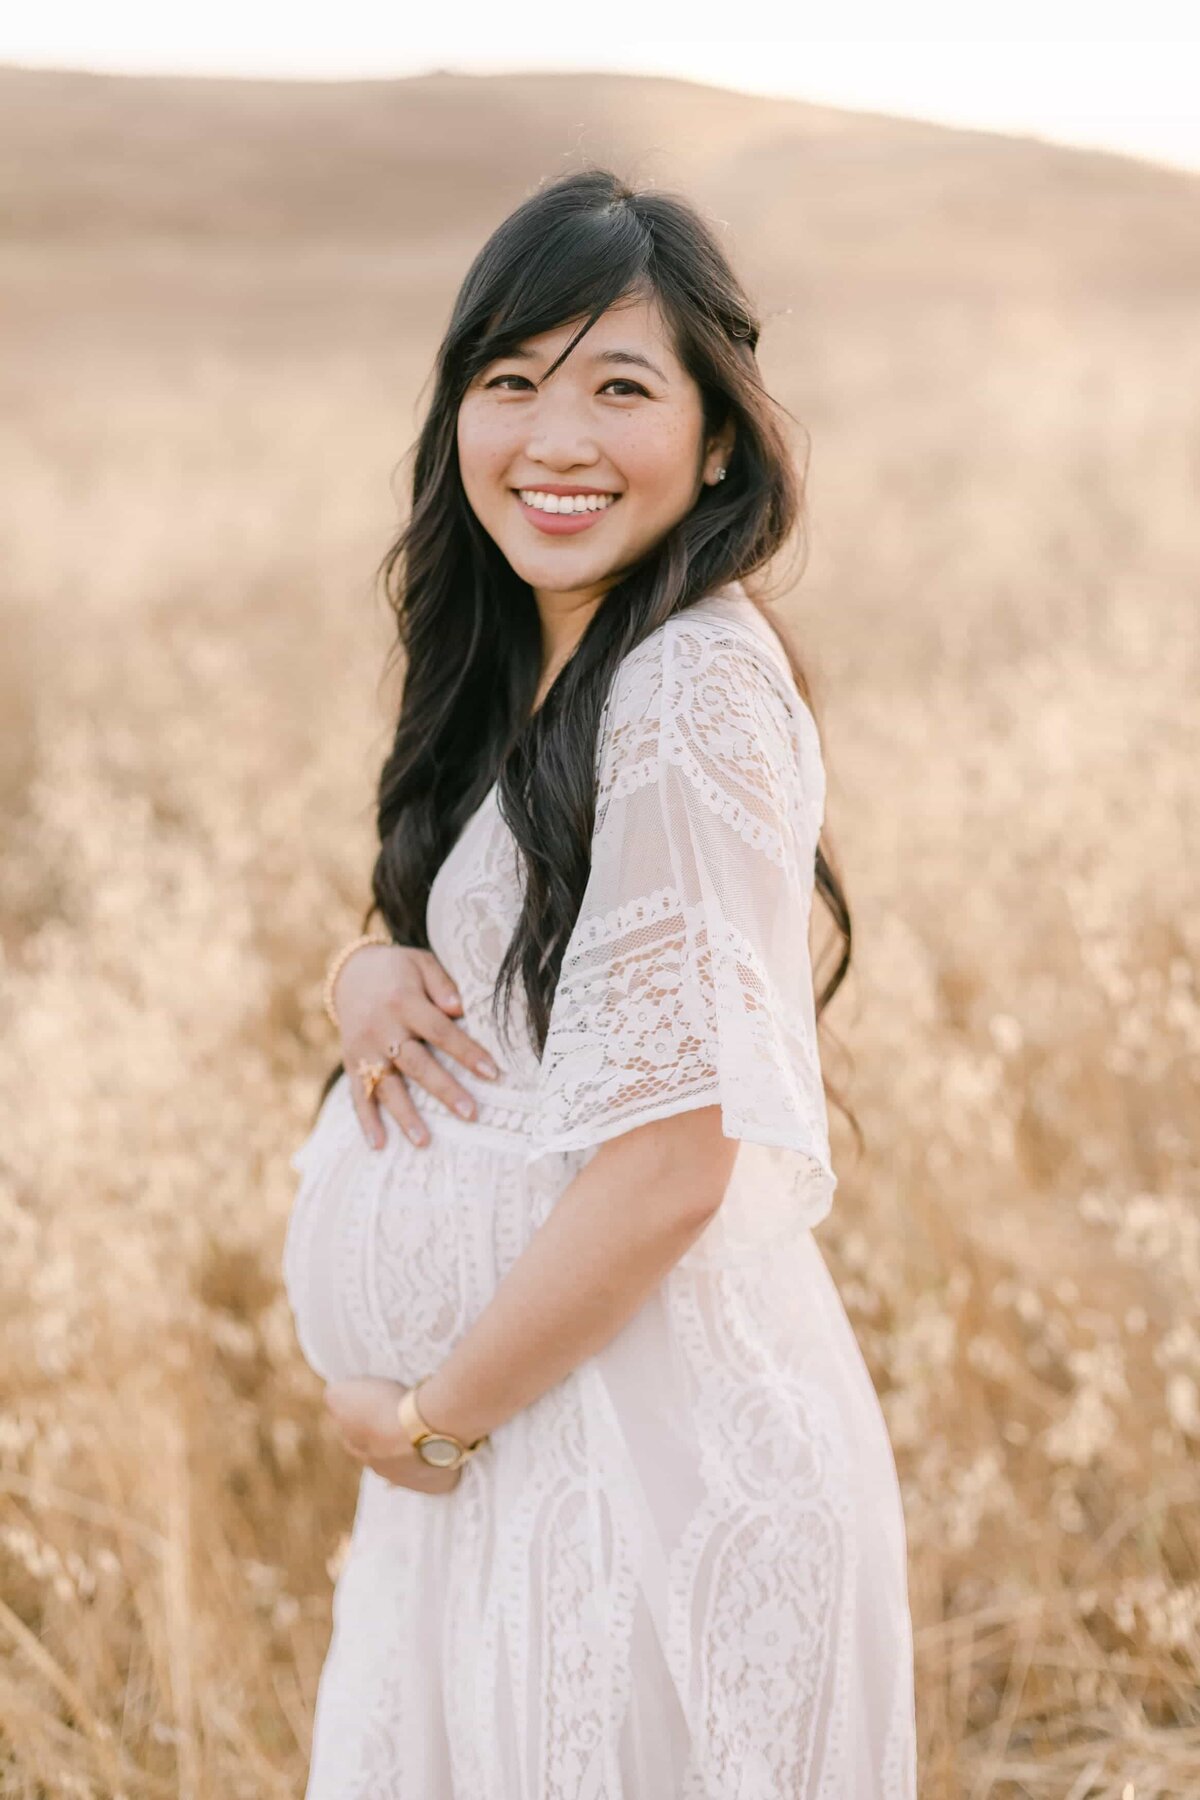 Orange County Maternity Photographer - pregnant woman smiling for camera while holding her baby bump